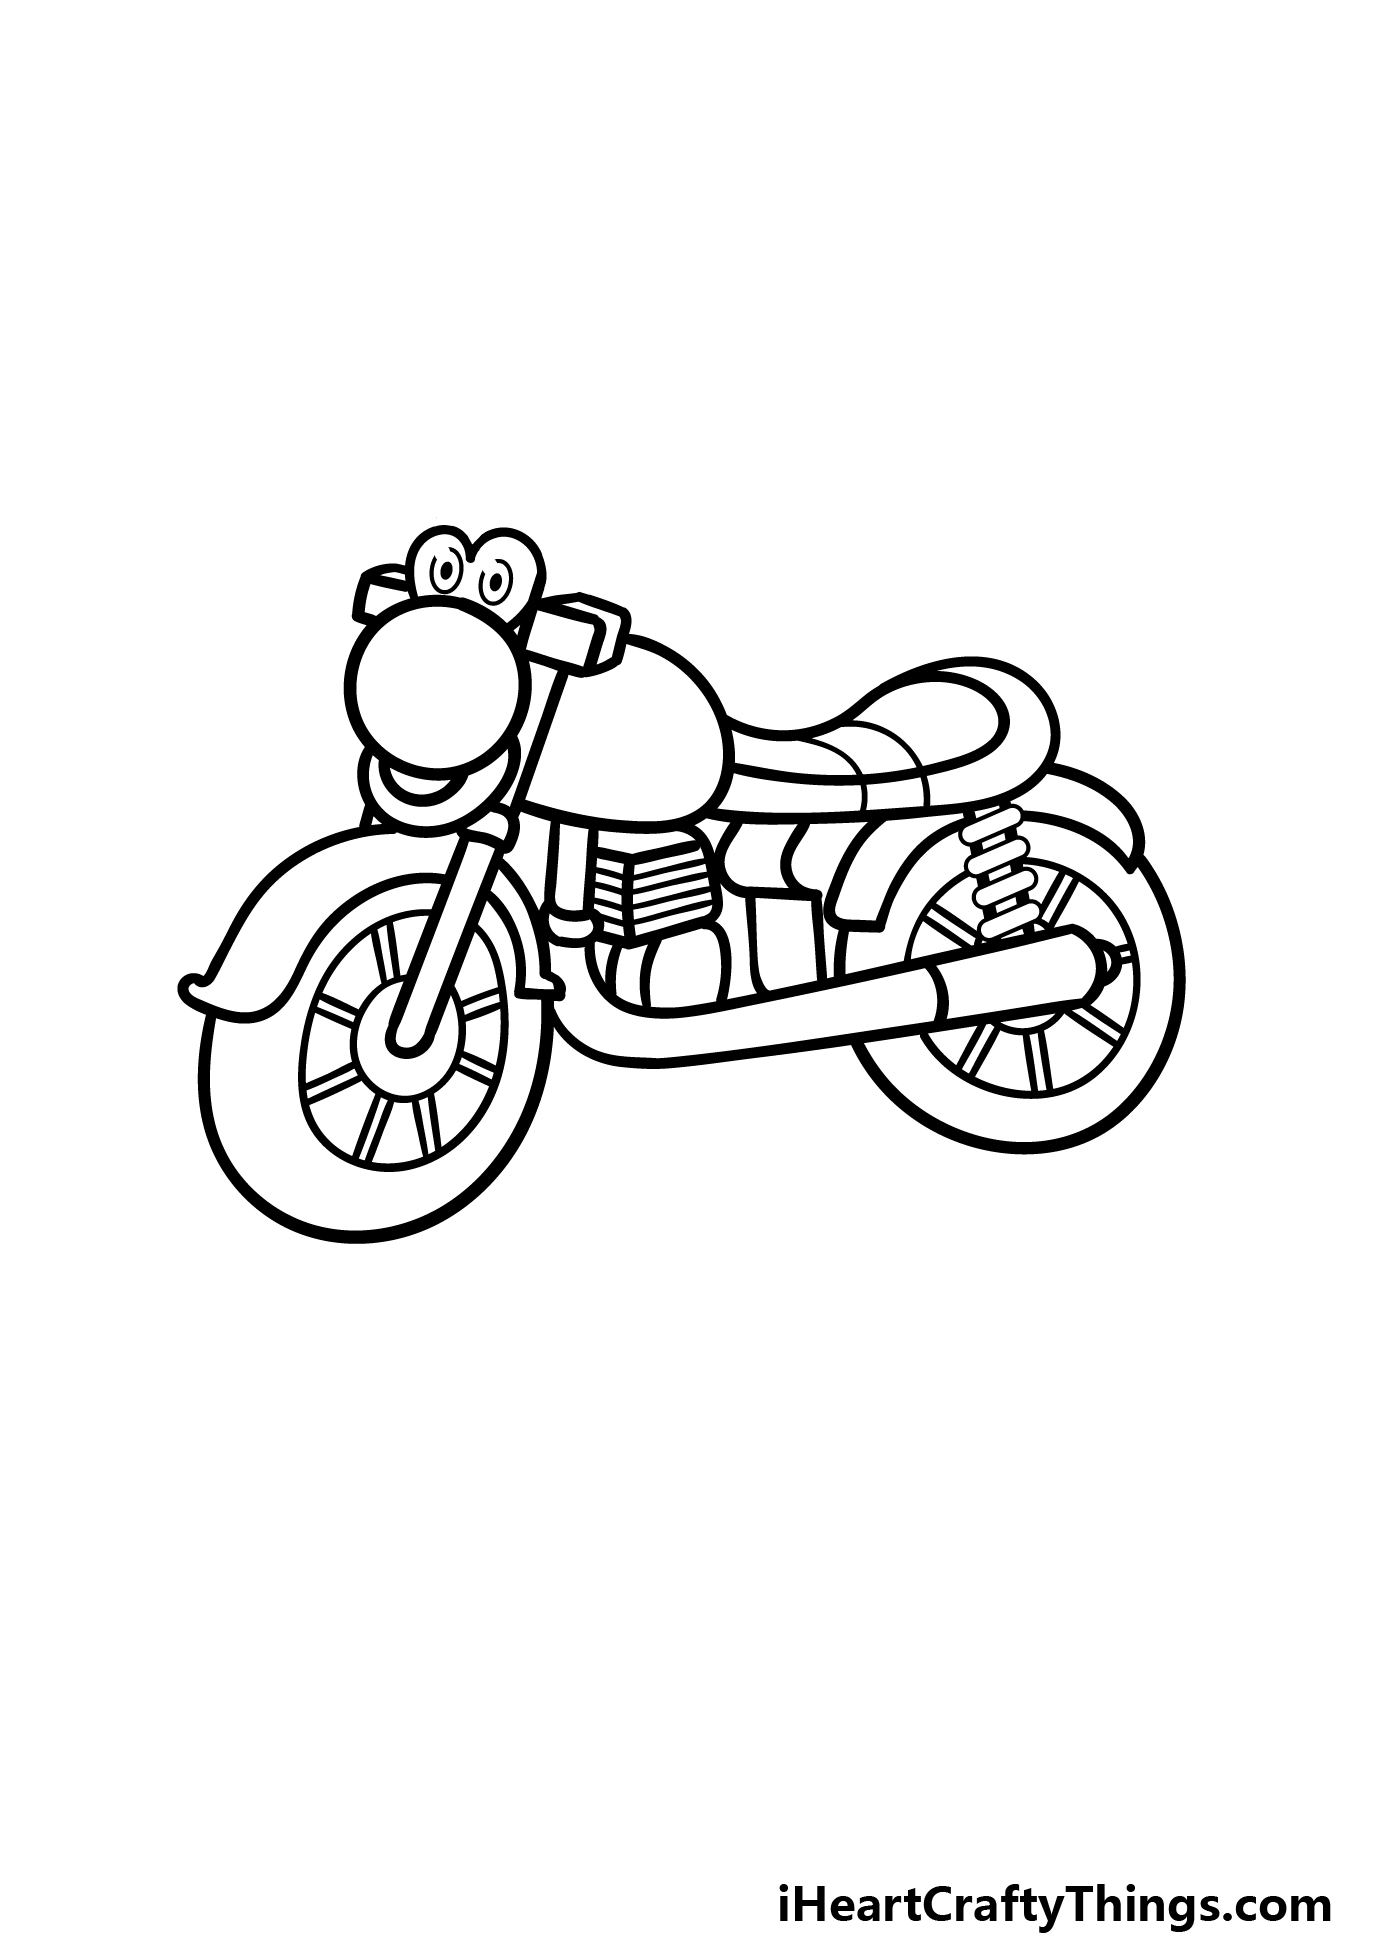 how to draw a cartoon motorcycle step 6